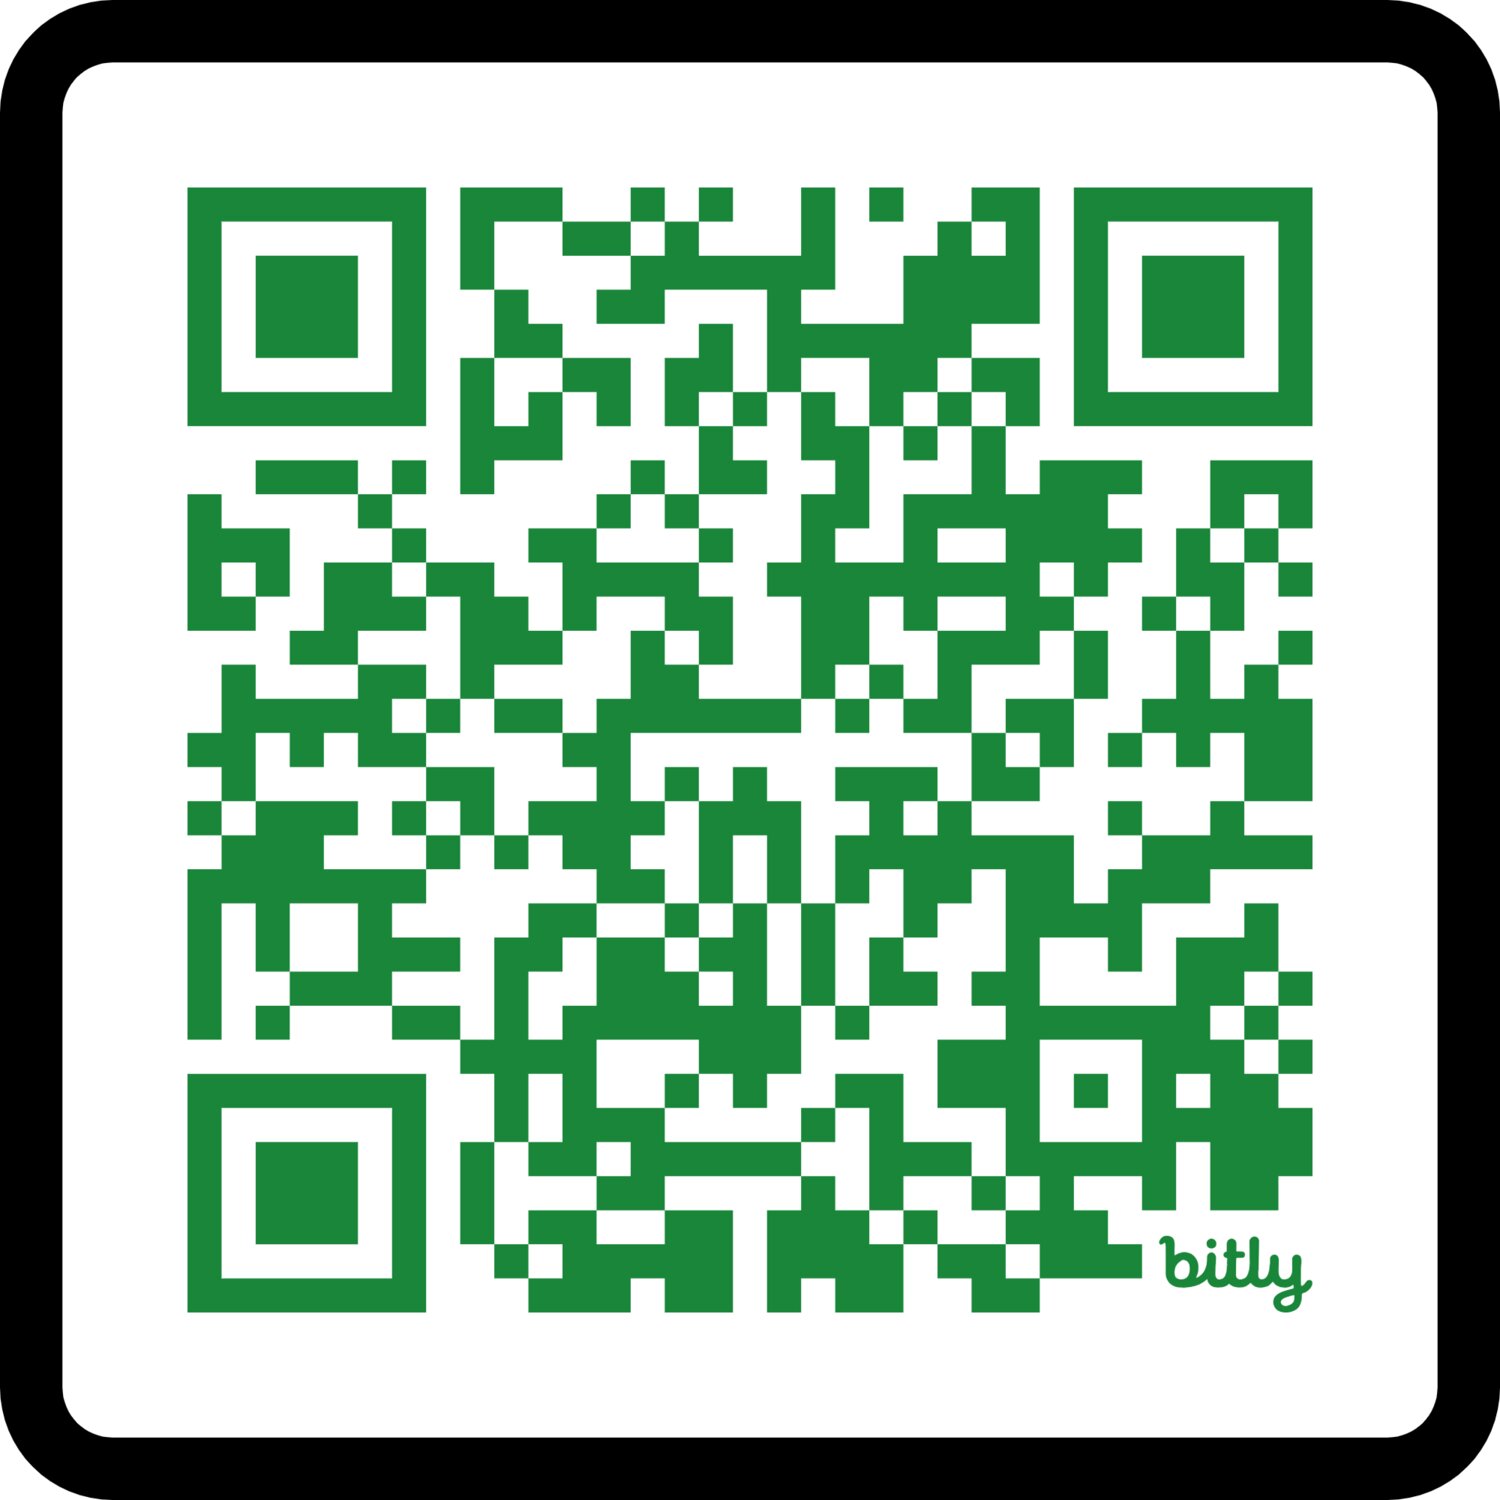 For tickets to the Long Island Championship, scan QR code.